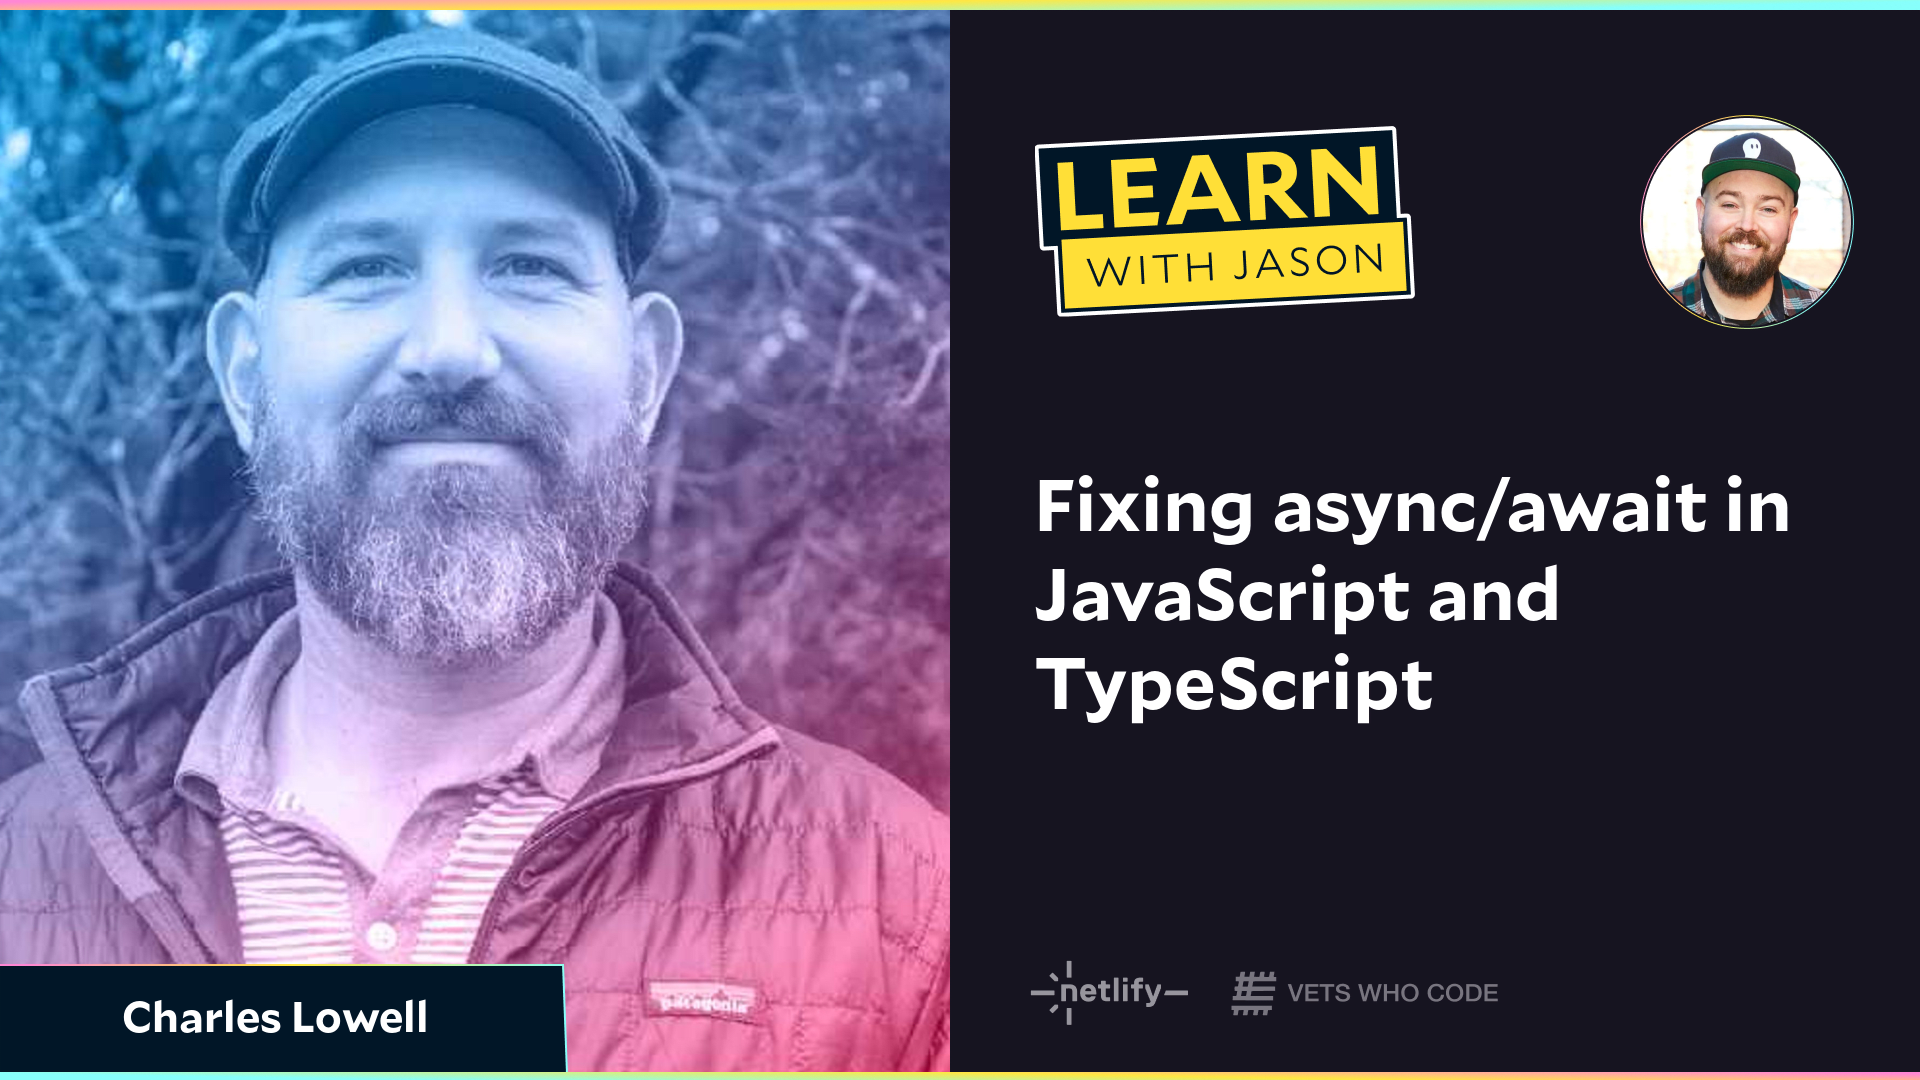 Fixing async/await in JavaScript and TypeScript (with Charles Lowell)